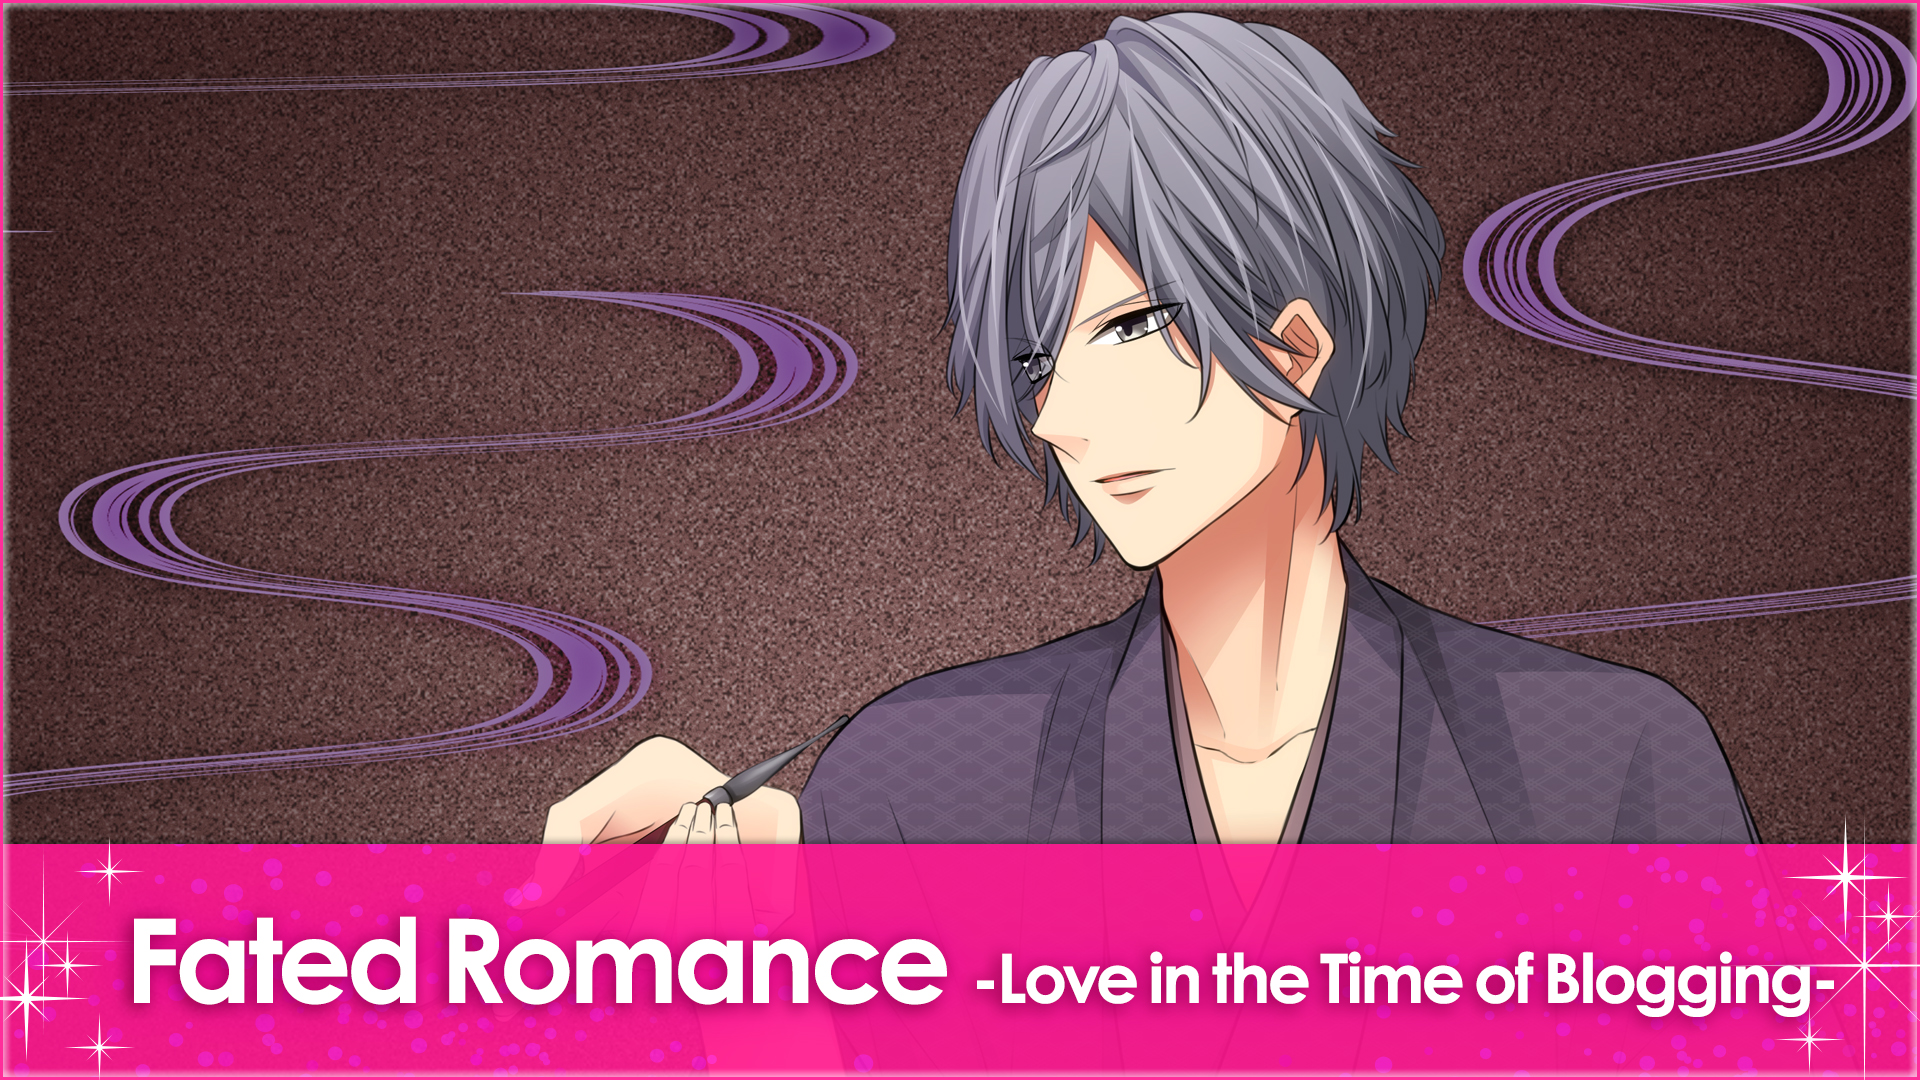 Fated Romance -Love in the Time of Blogging-